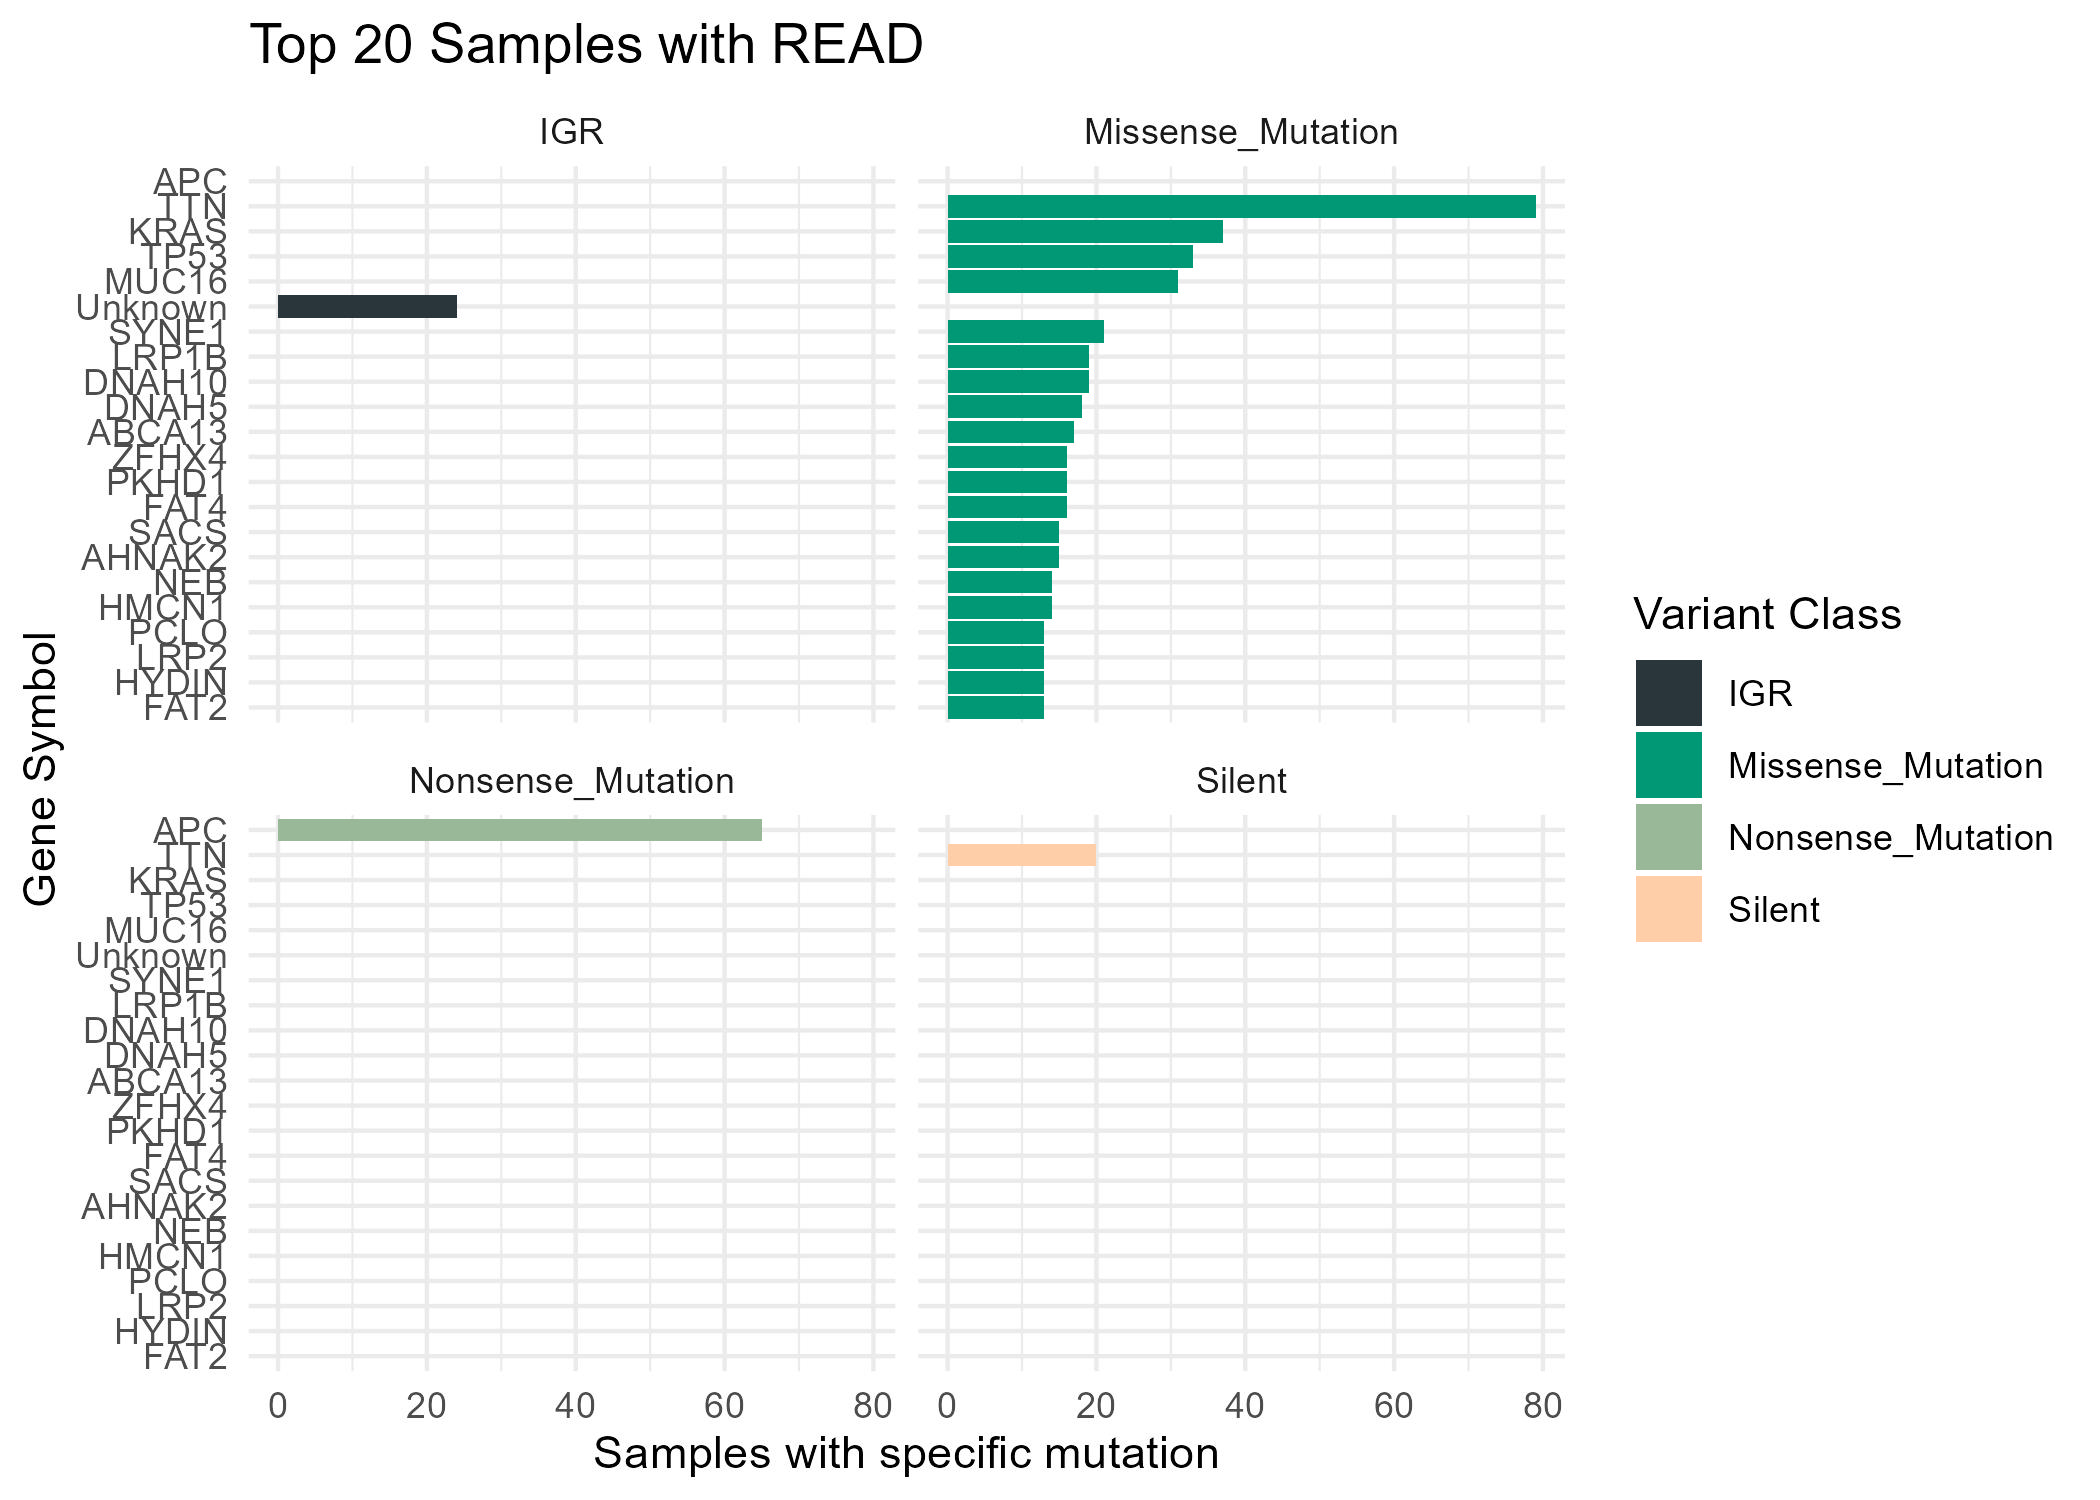 Samples with specific mutation per gene